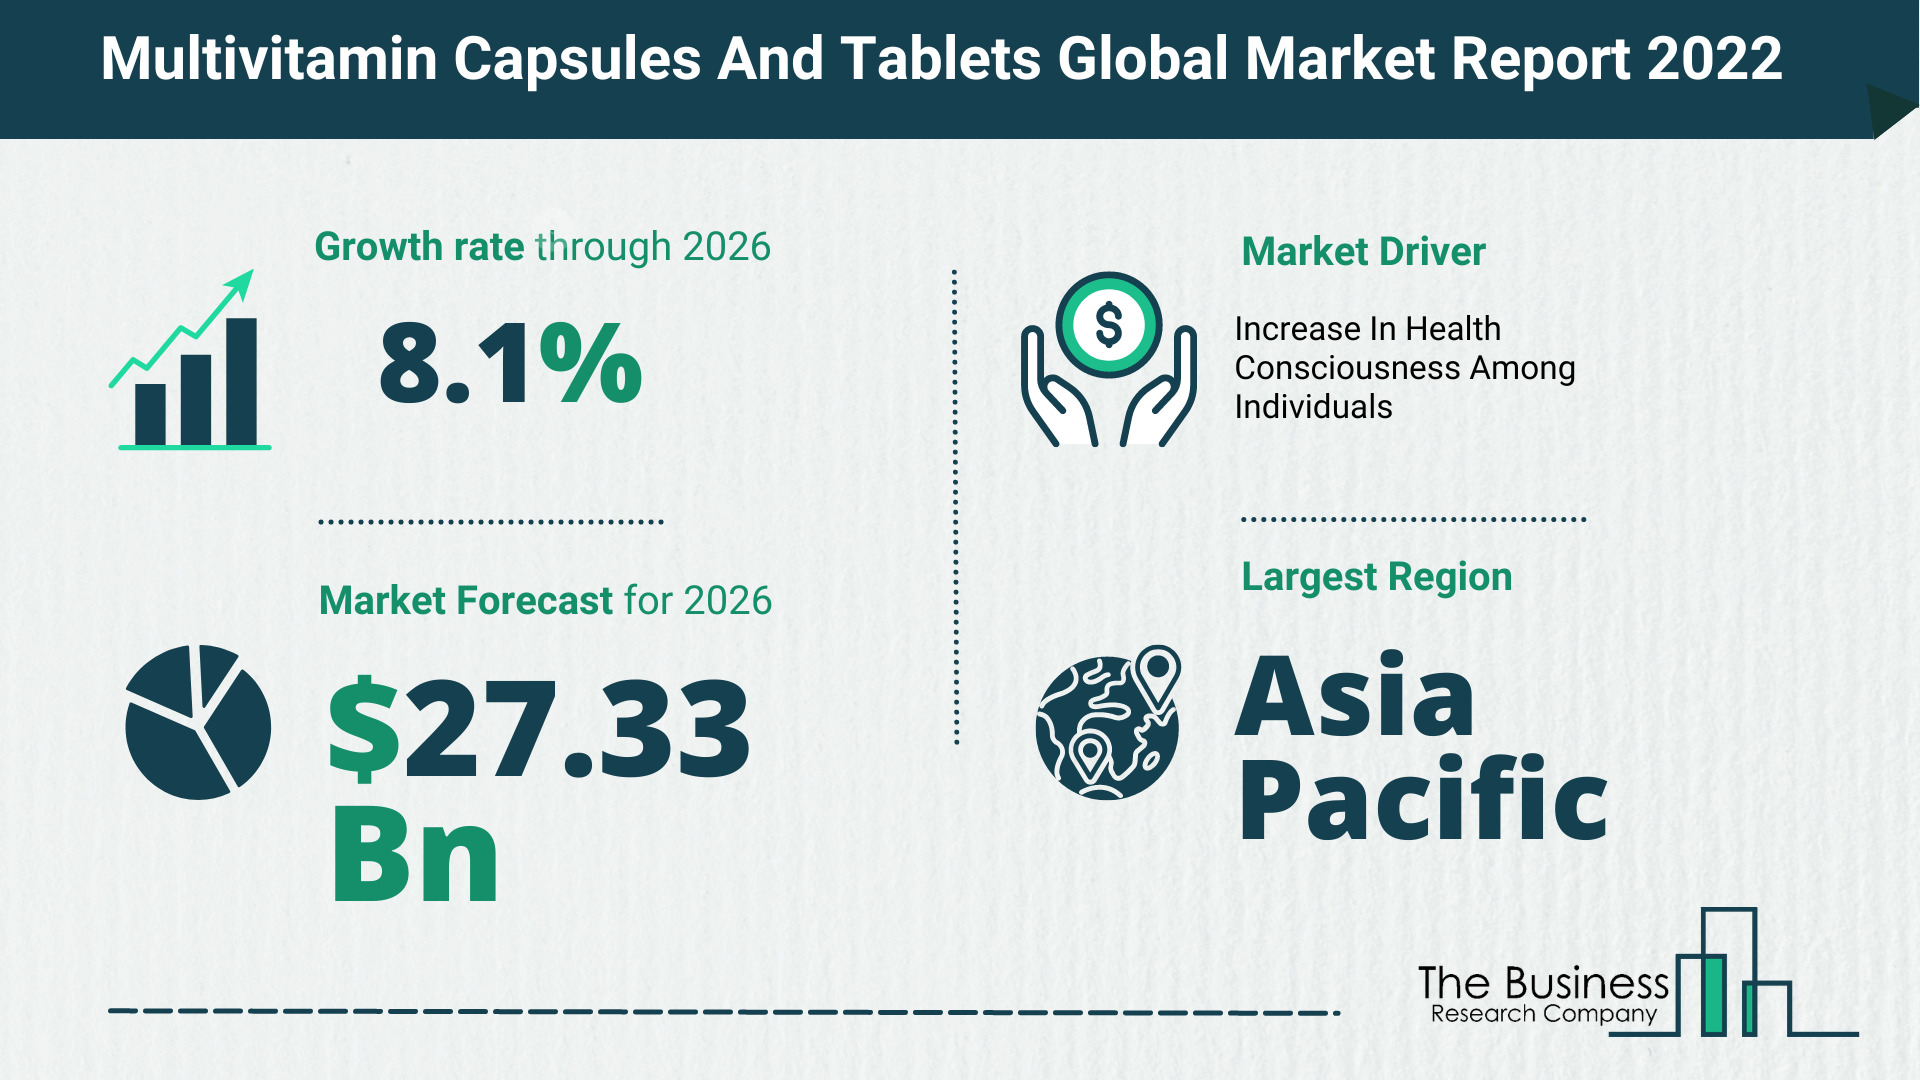 Global Multivitamin Capsules And Tablets Market 2022 – Market Opportunities And Strategies